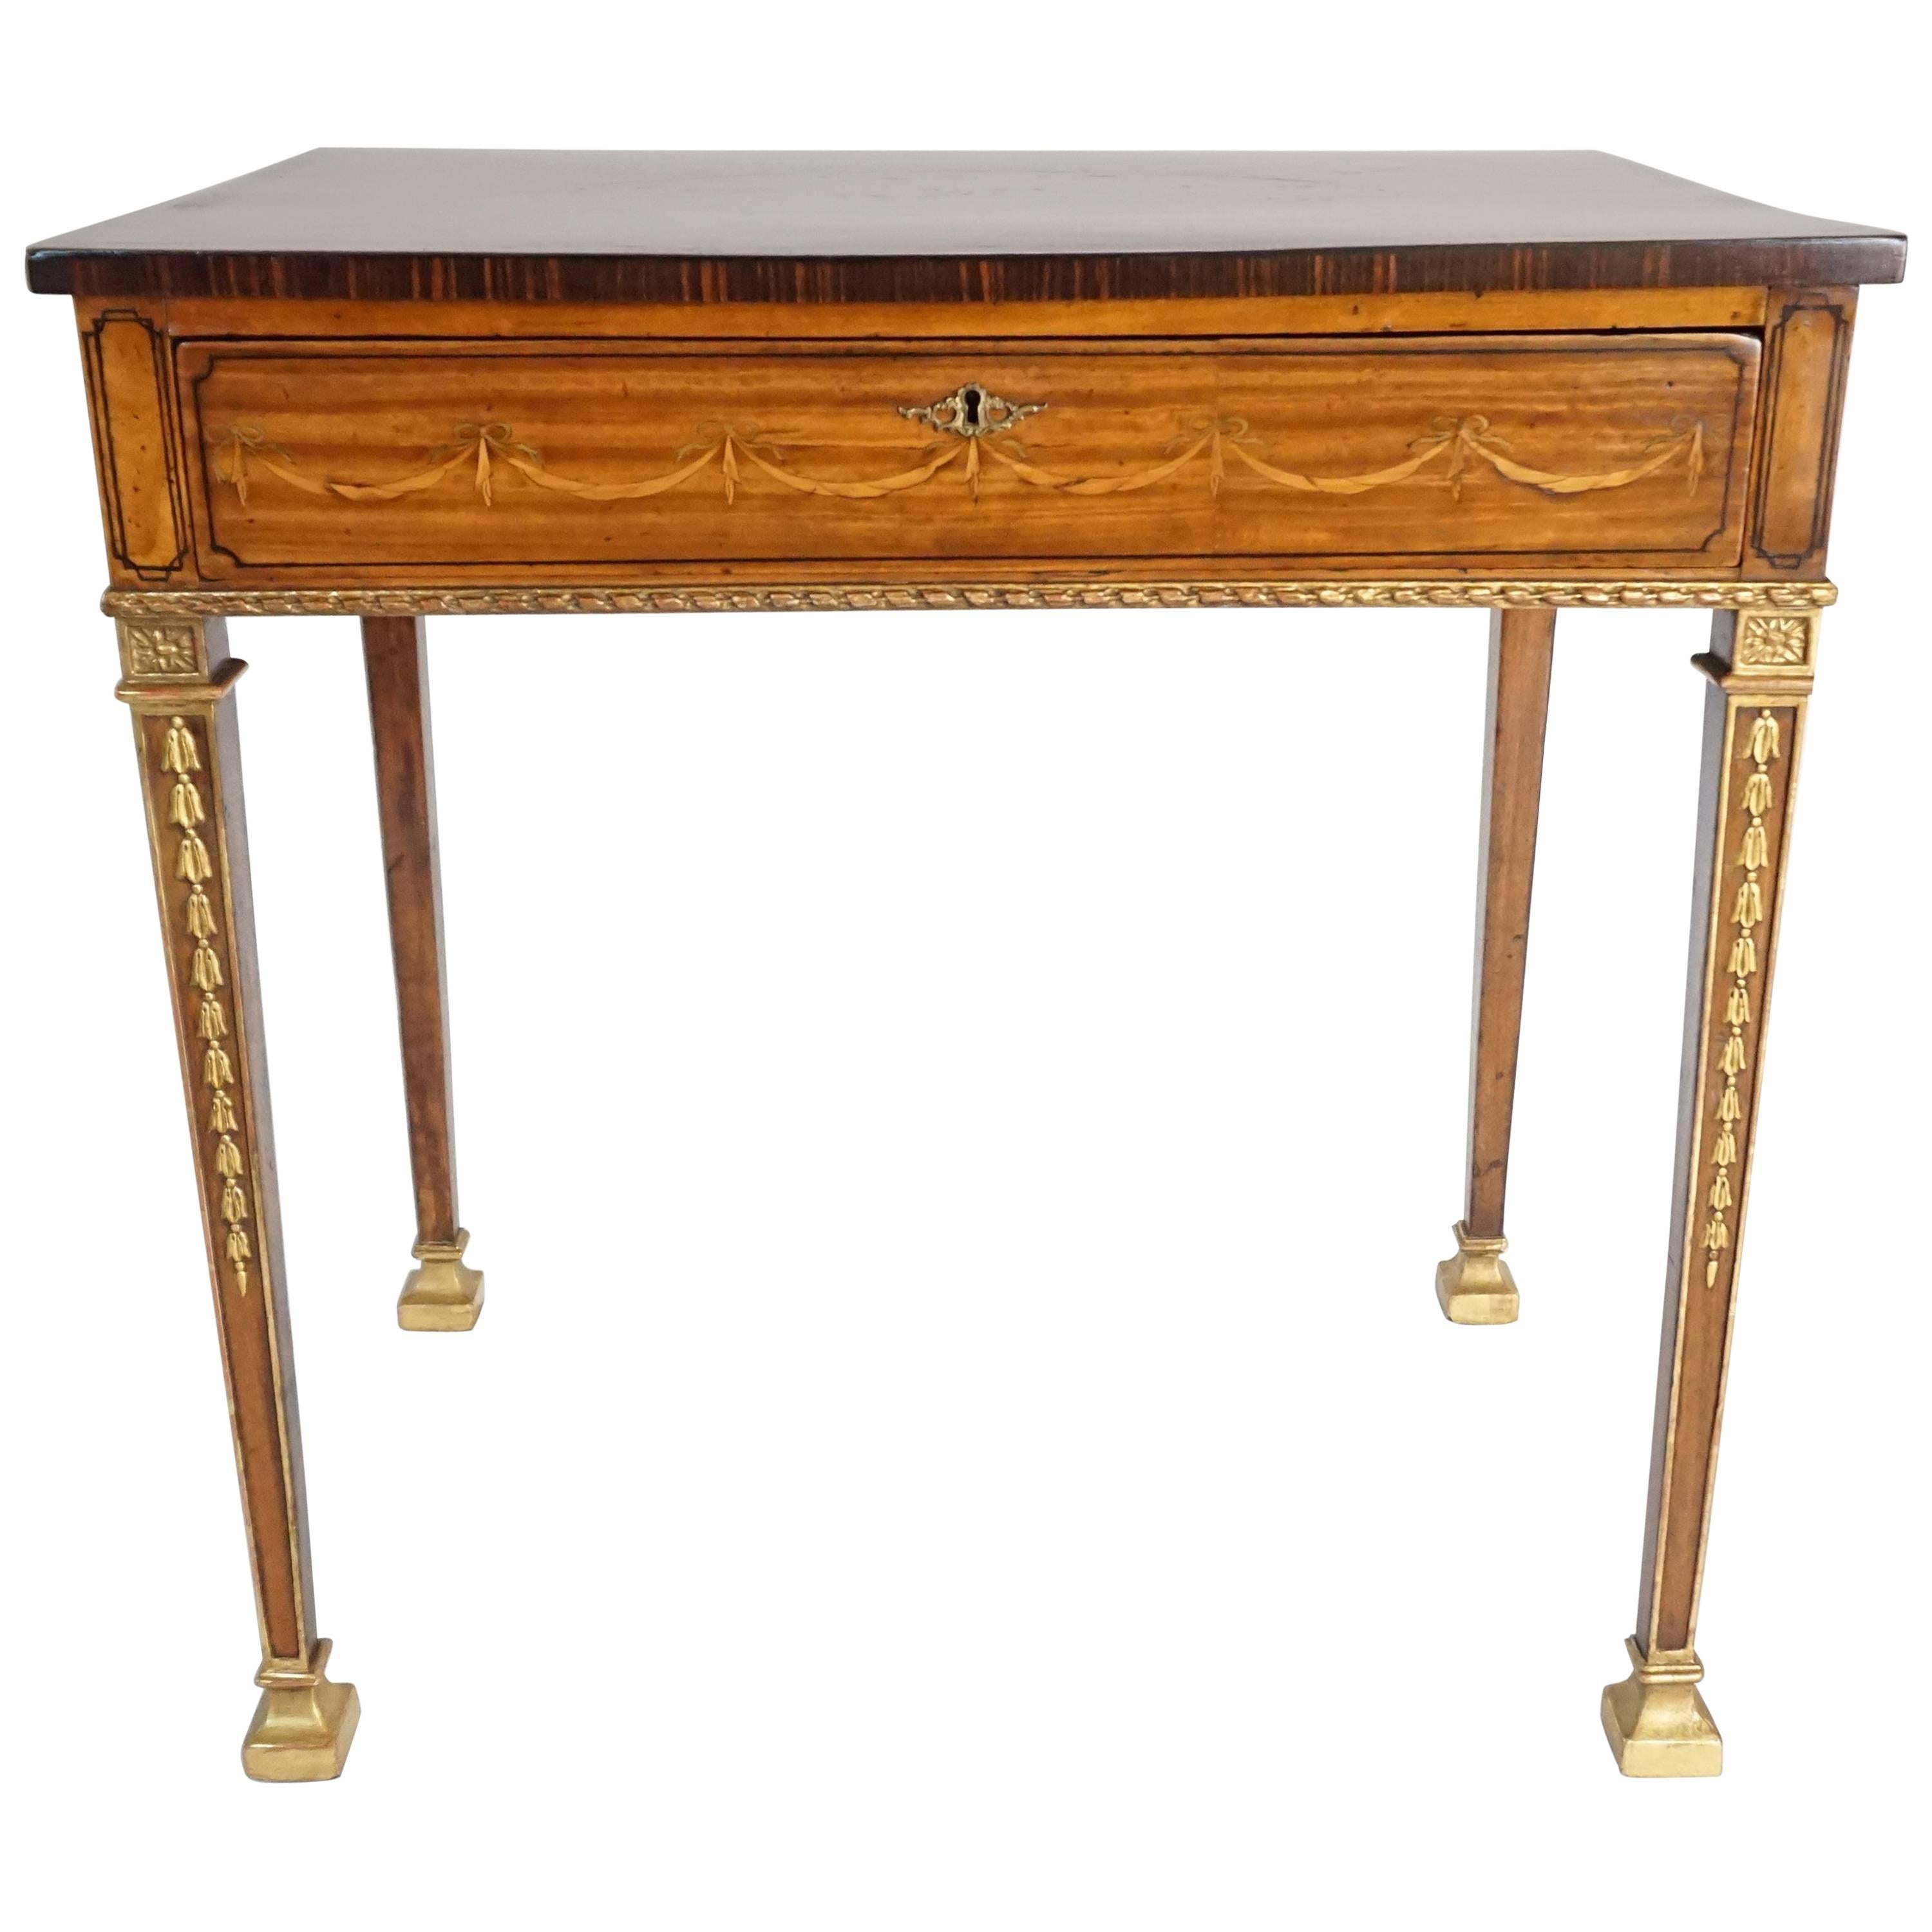 Important Parcel-Gilt Satinwood Marquetry Side Table, England, circa 1785